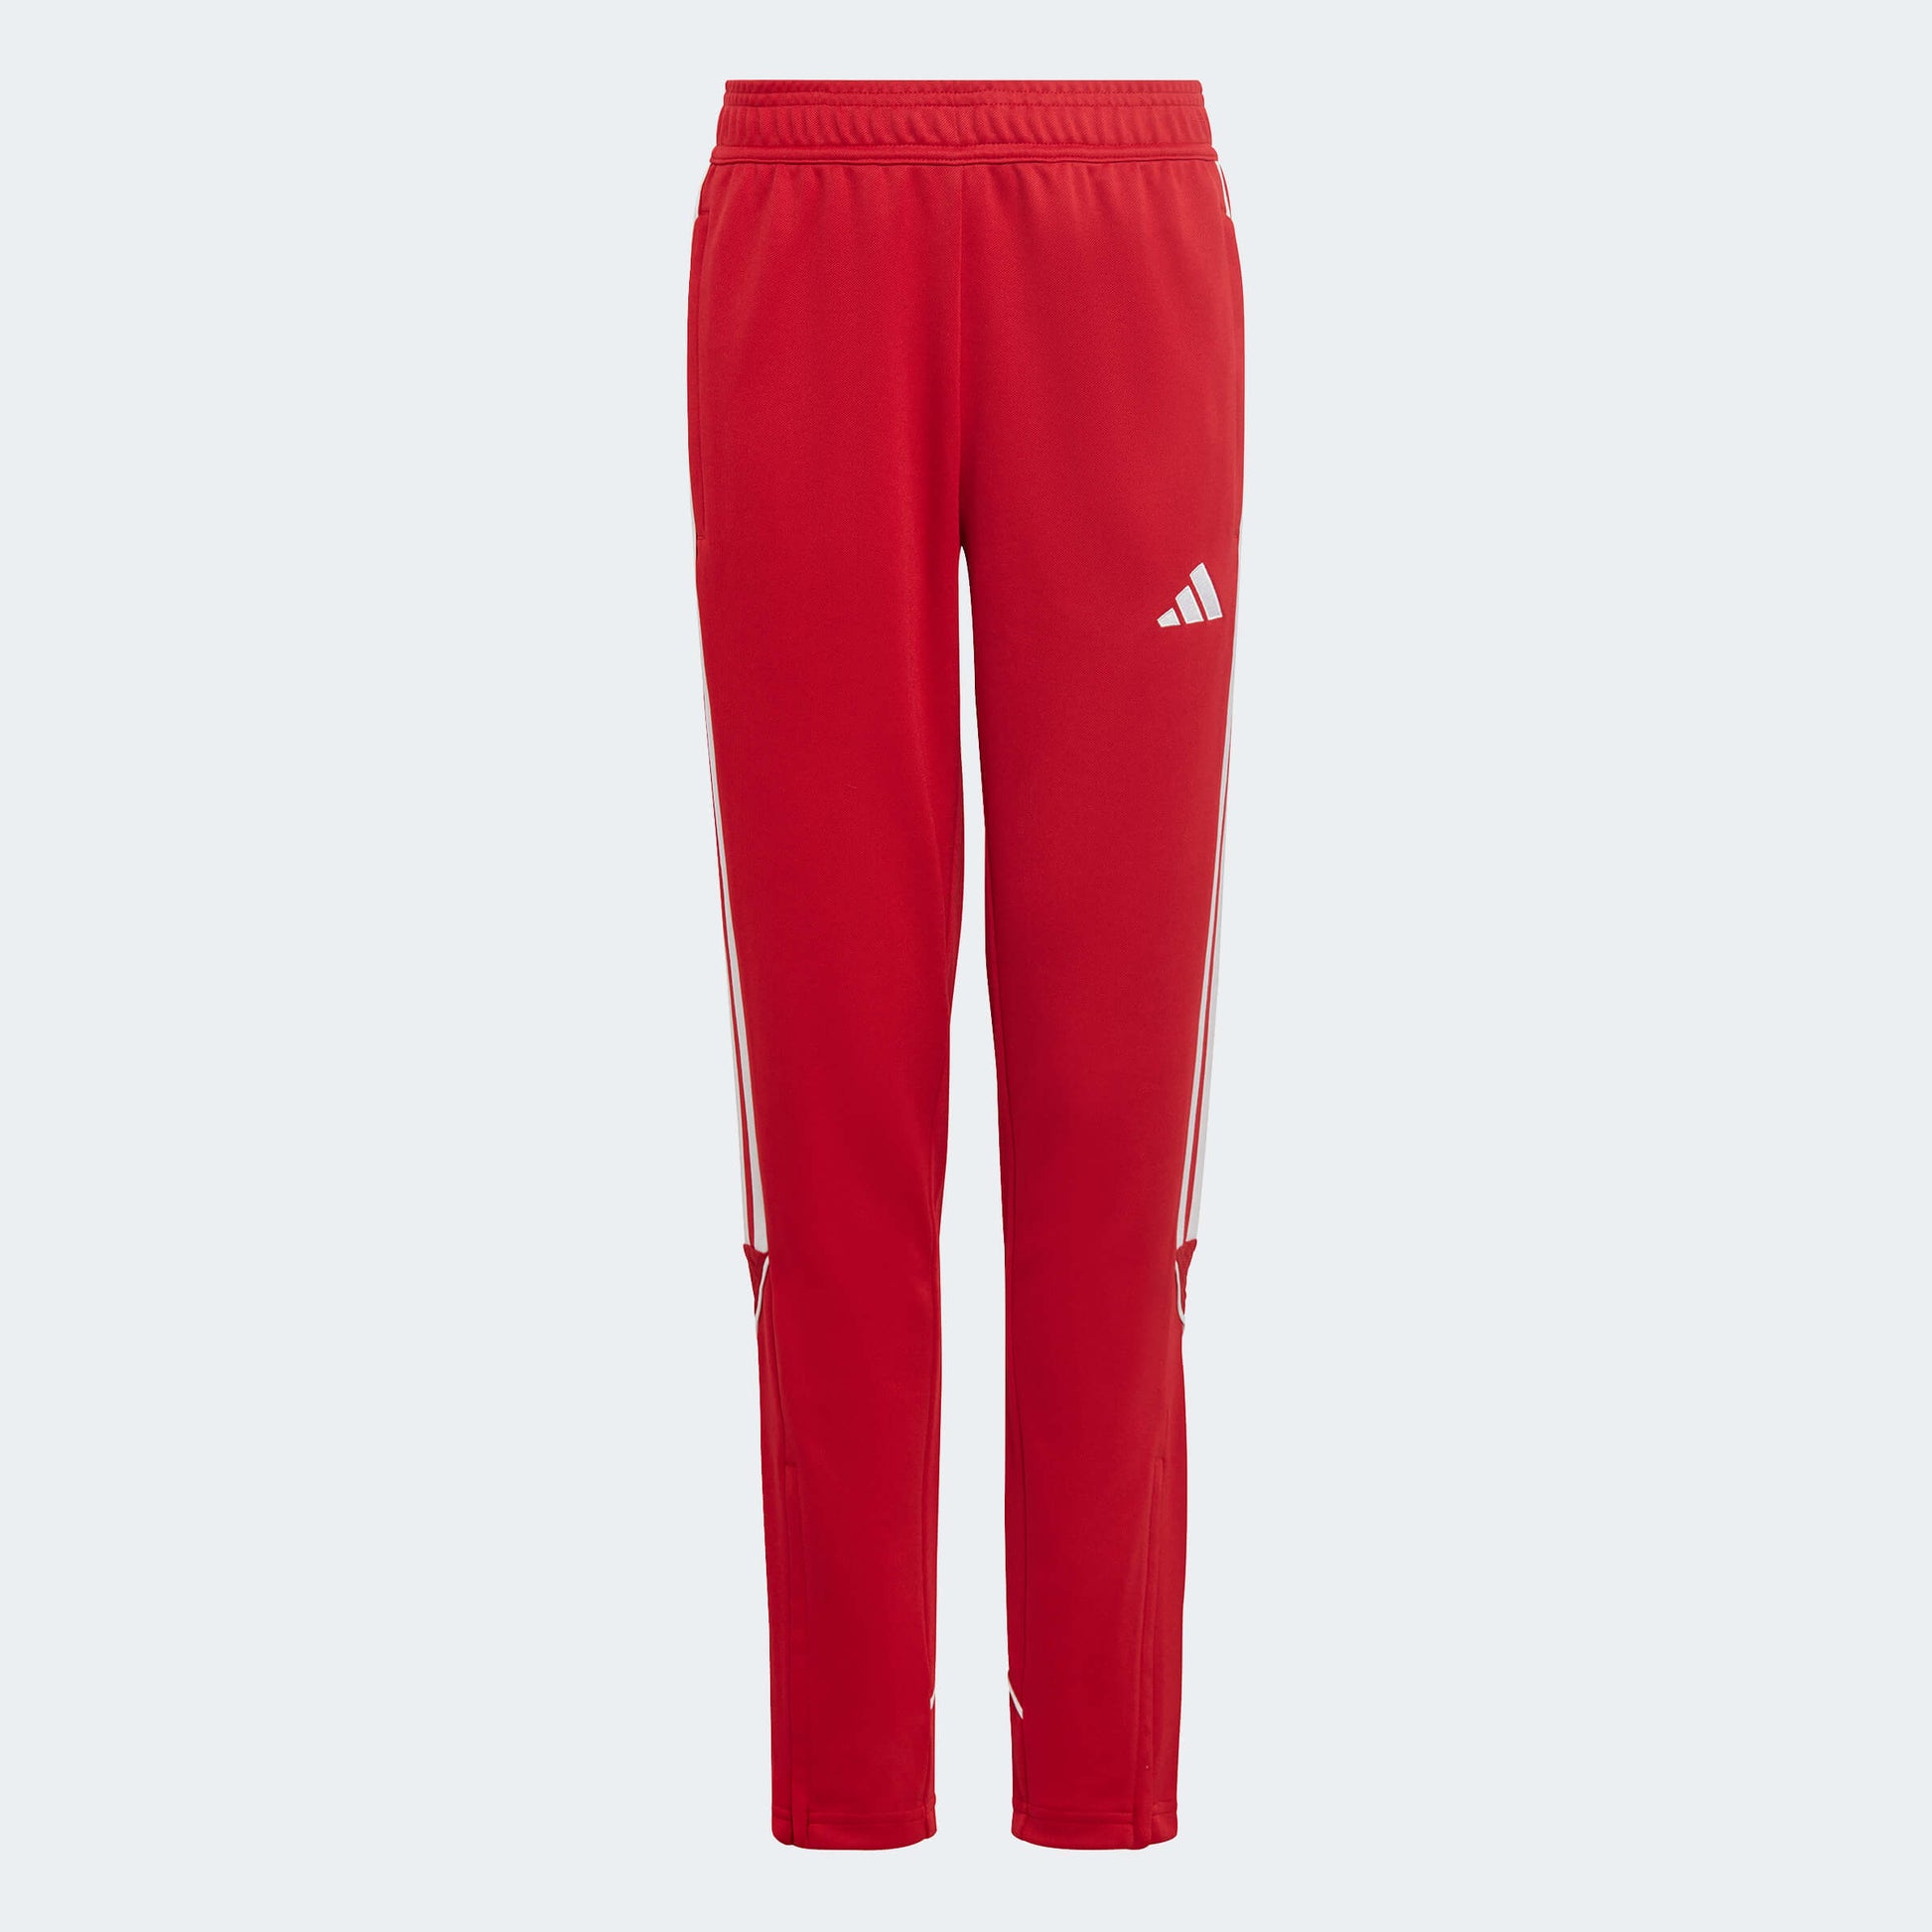 adidas YOUTH GIRLS 23 Tiro League Pant Team Power Red 2 (Front)